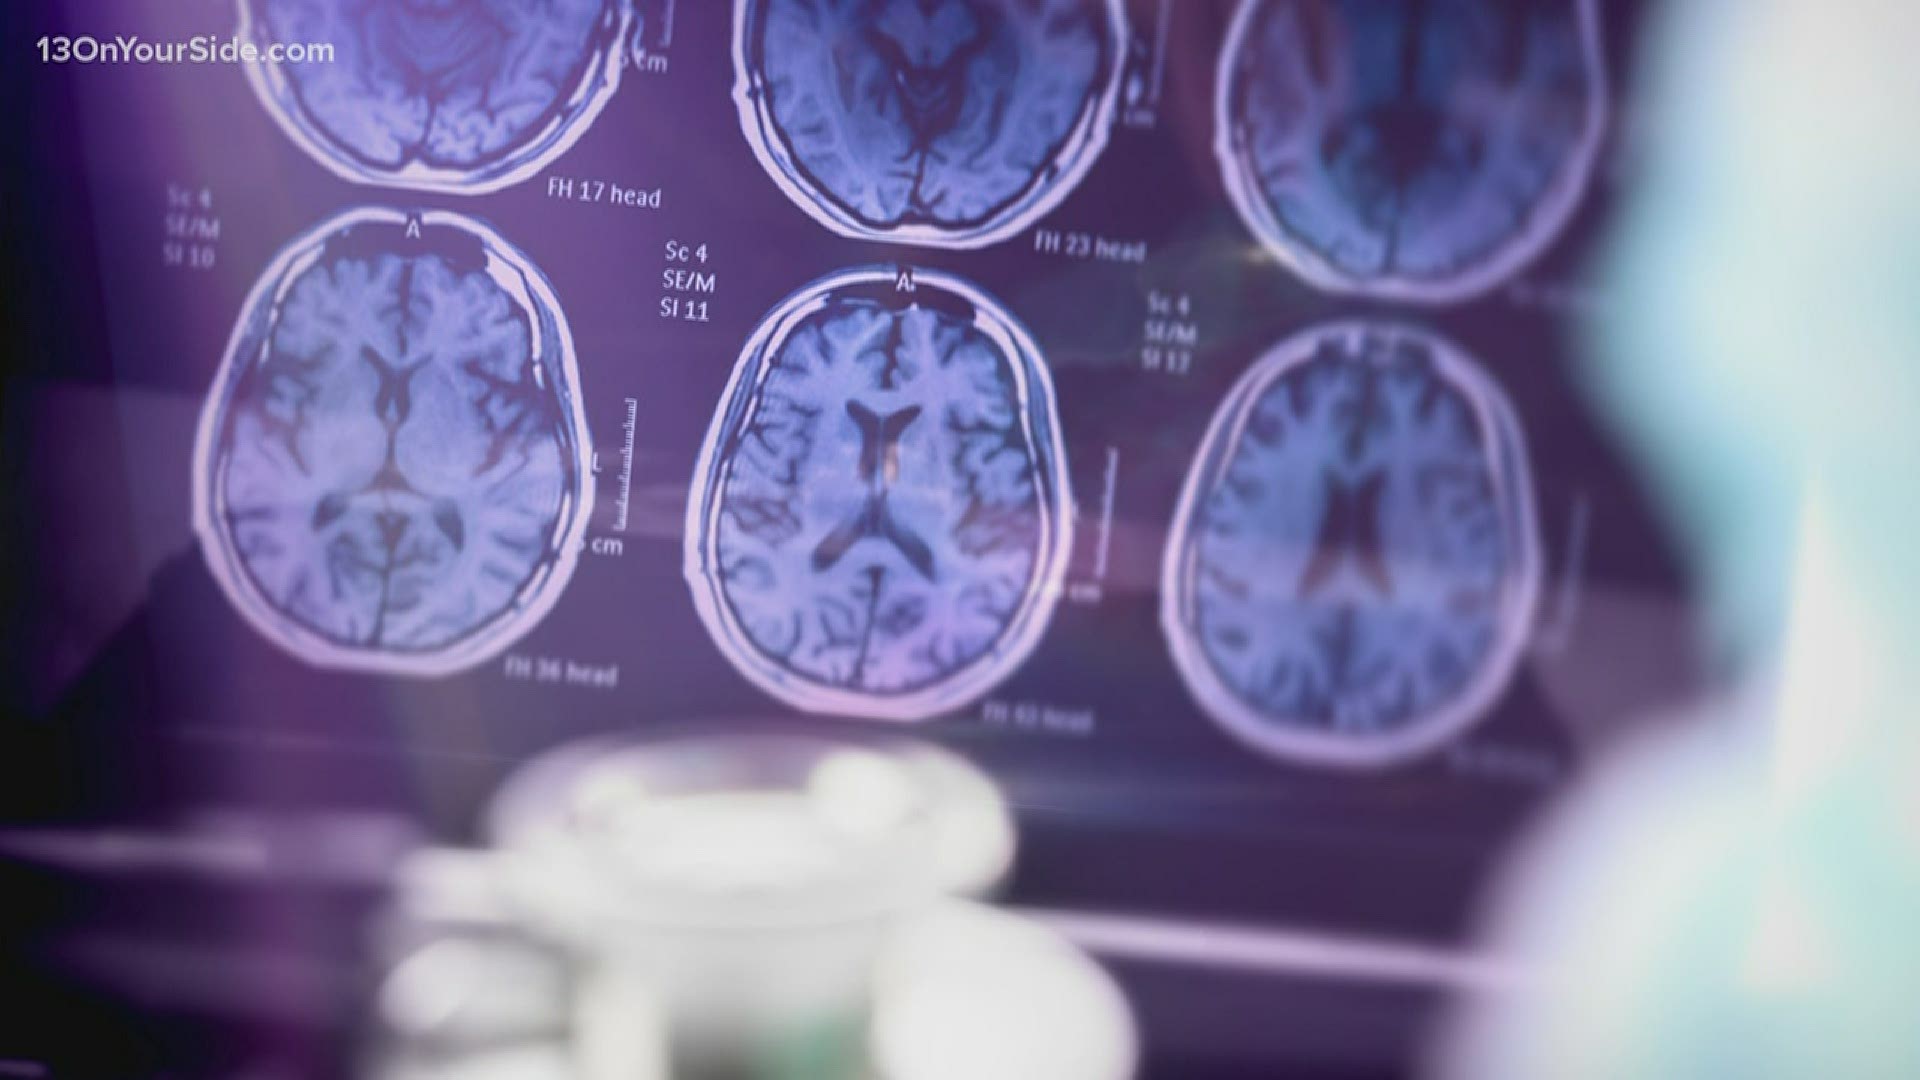 Local hospitals see uptick in strokes due to COVID-19.